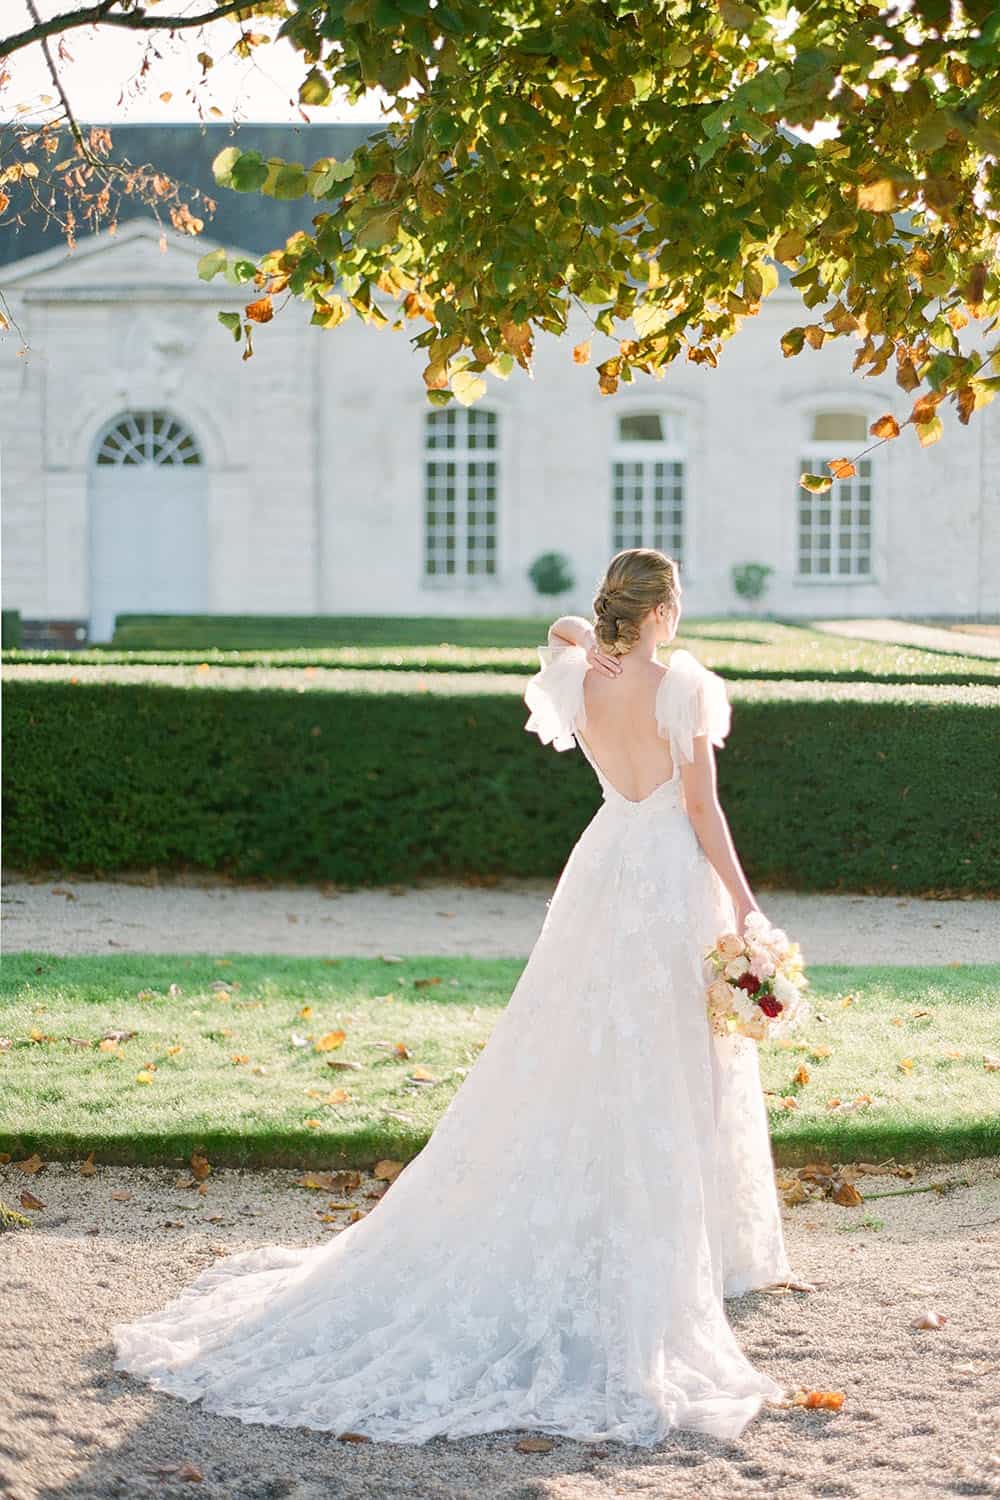 Marie Antoinette Inspired Bridal Fashion in a Loire Valley Chateau ⋆ Ruffled